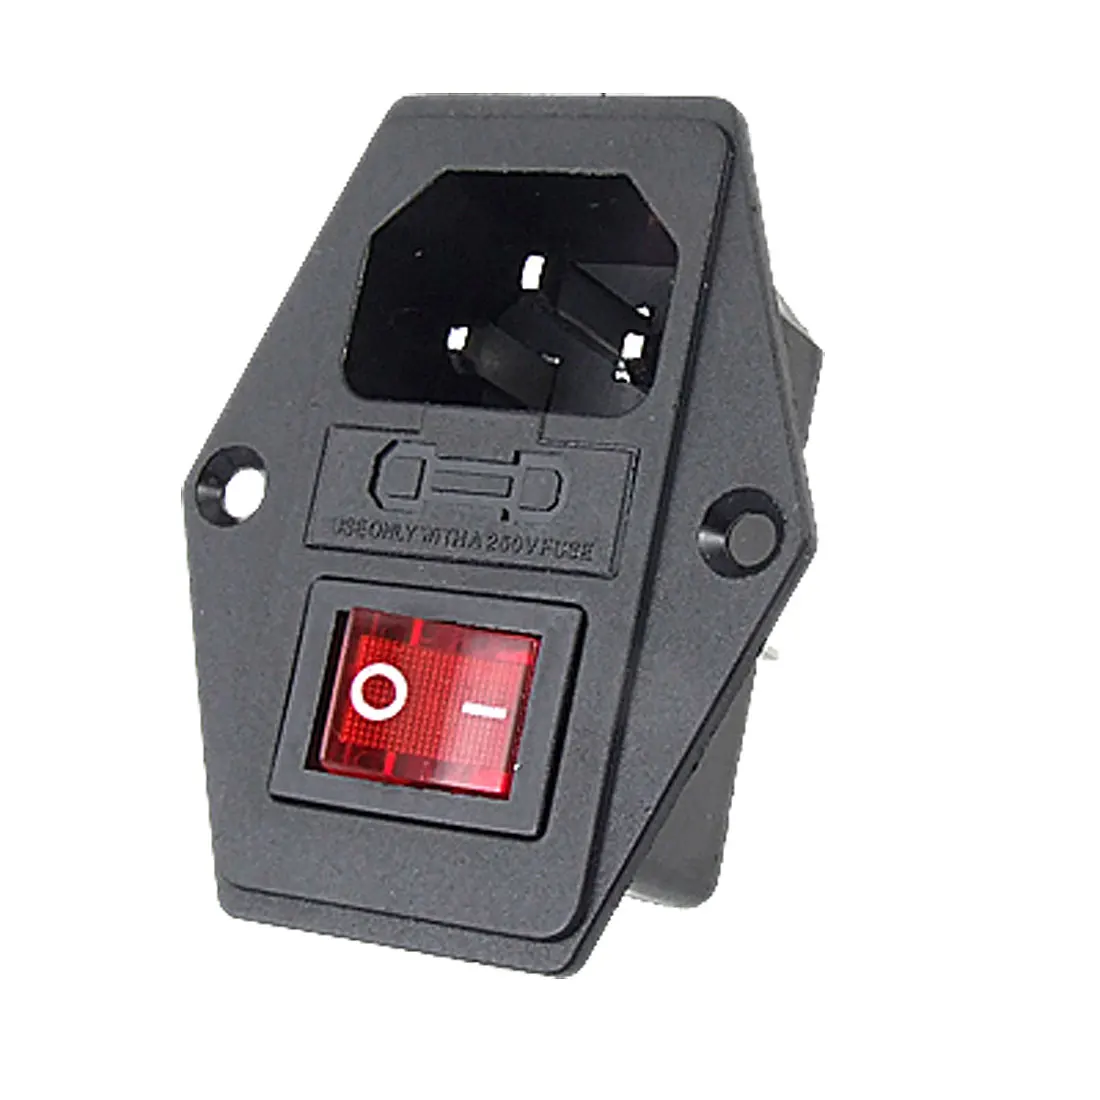 10A 250V IEC320 C14 3 Pin Fused Power Socket Connector Switch 1Pc  HU 